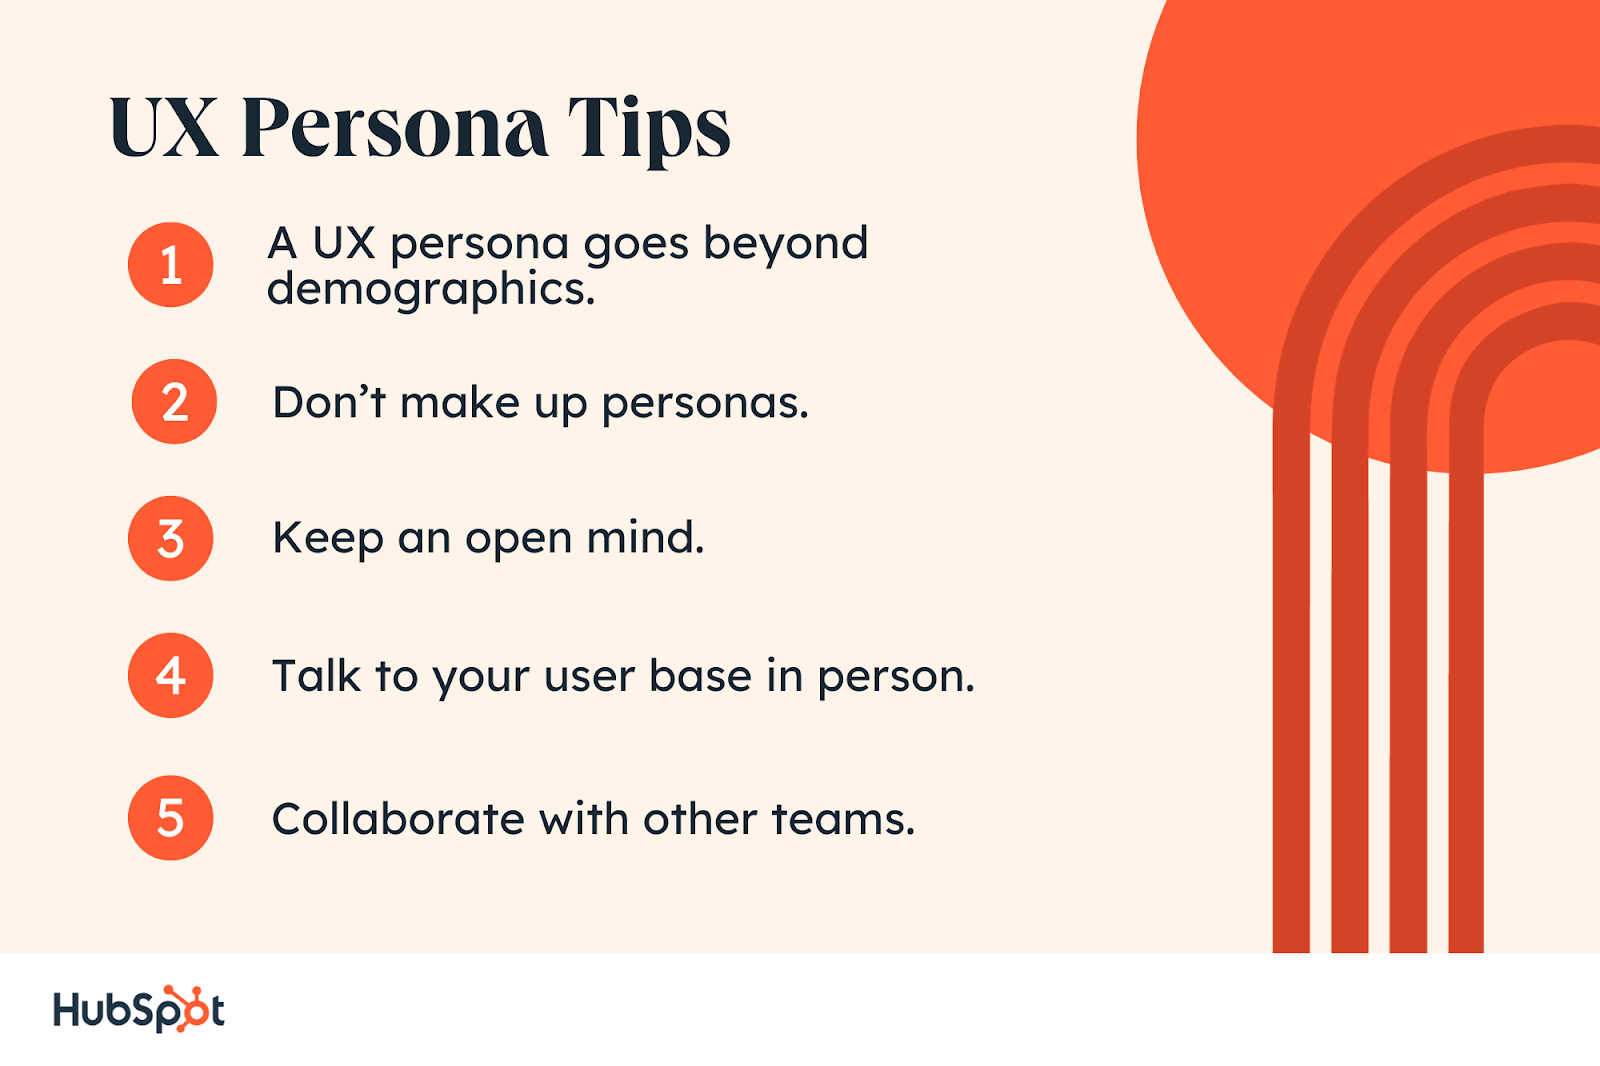 UX Persona Tips. A UX persona goes beyond demographics. Don’t make up personas. Keep an open mind. Talk to your user base in person. Collaborate with other teams.